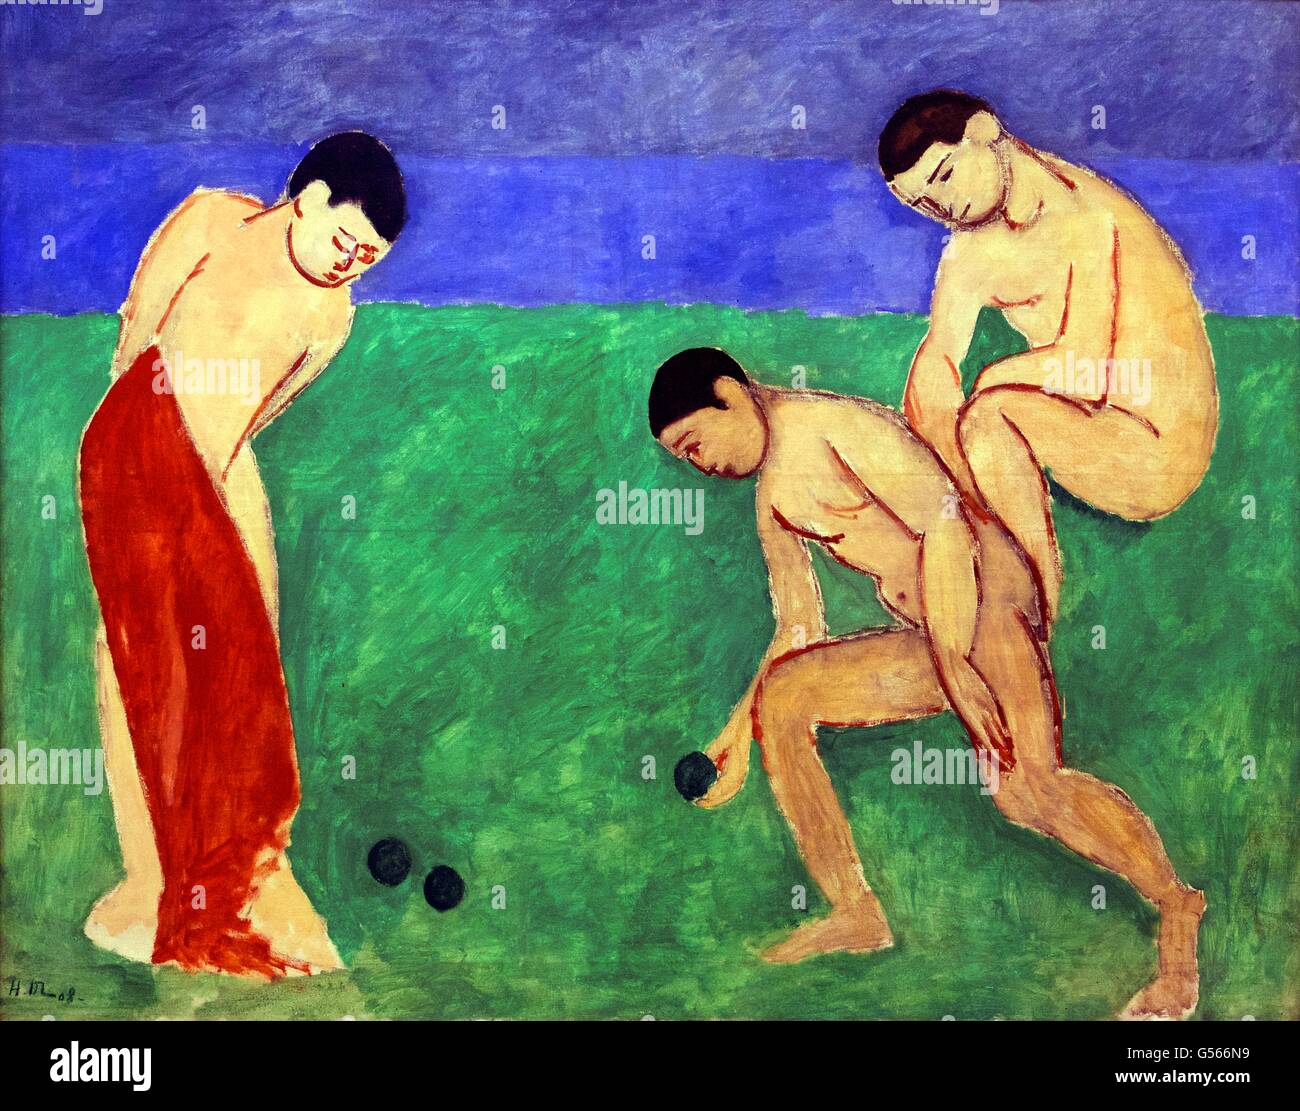 Game of Bowls, by Henri Matisse, 1908, State Hermitage Museum, Saint Petersburg, Russia Stock Photo